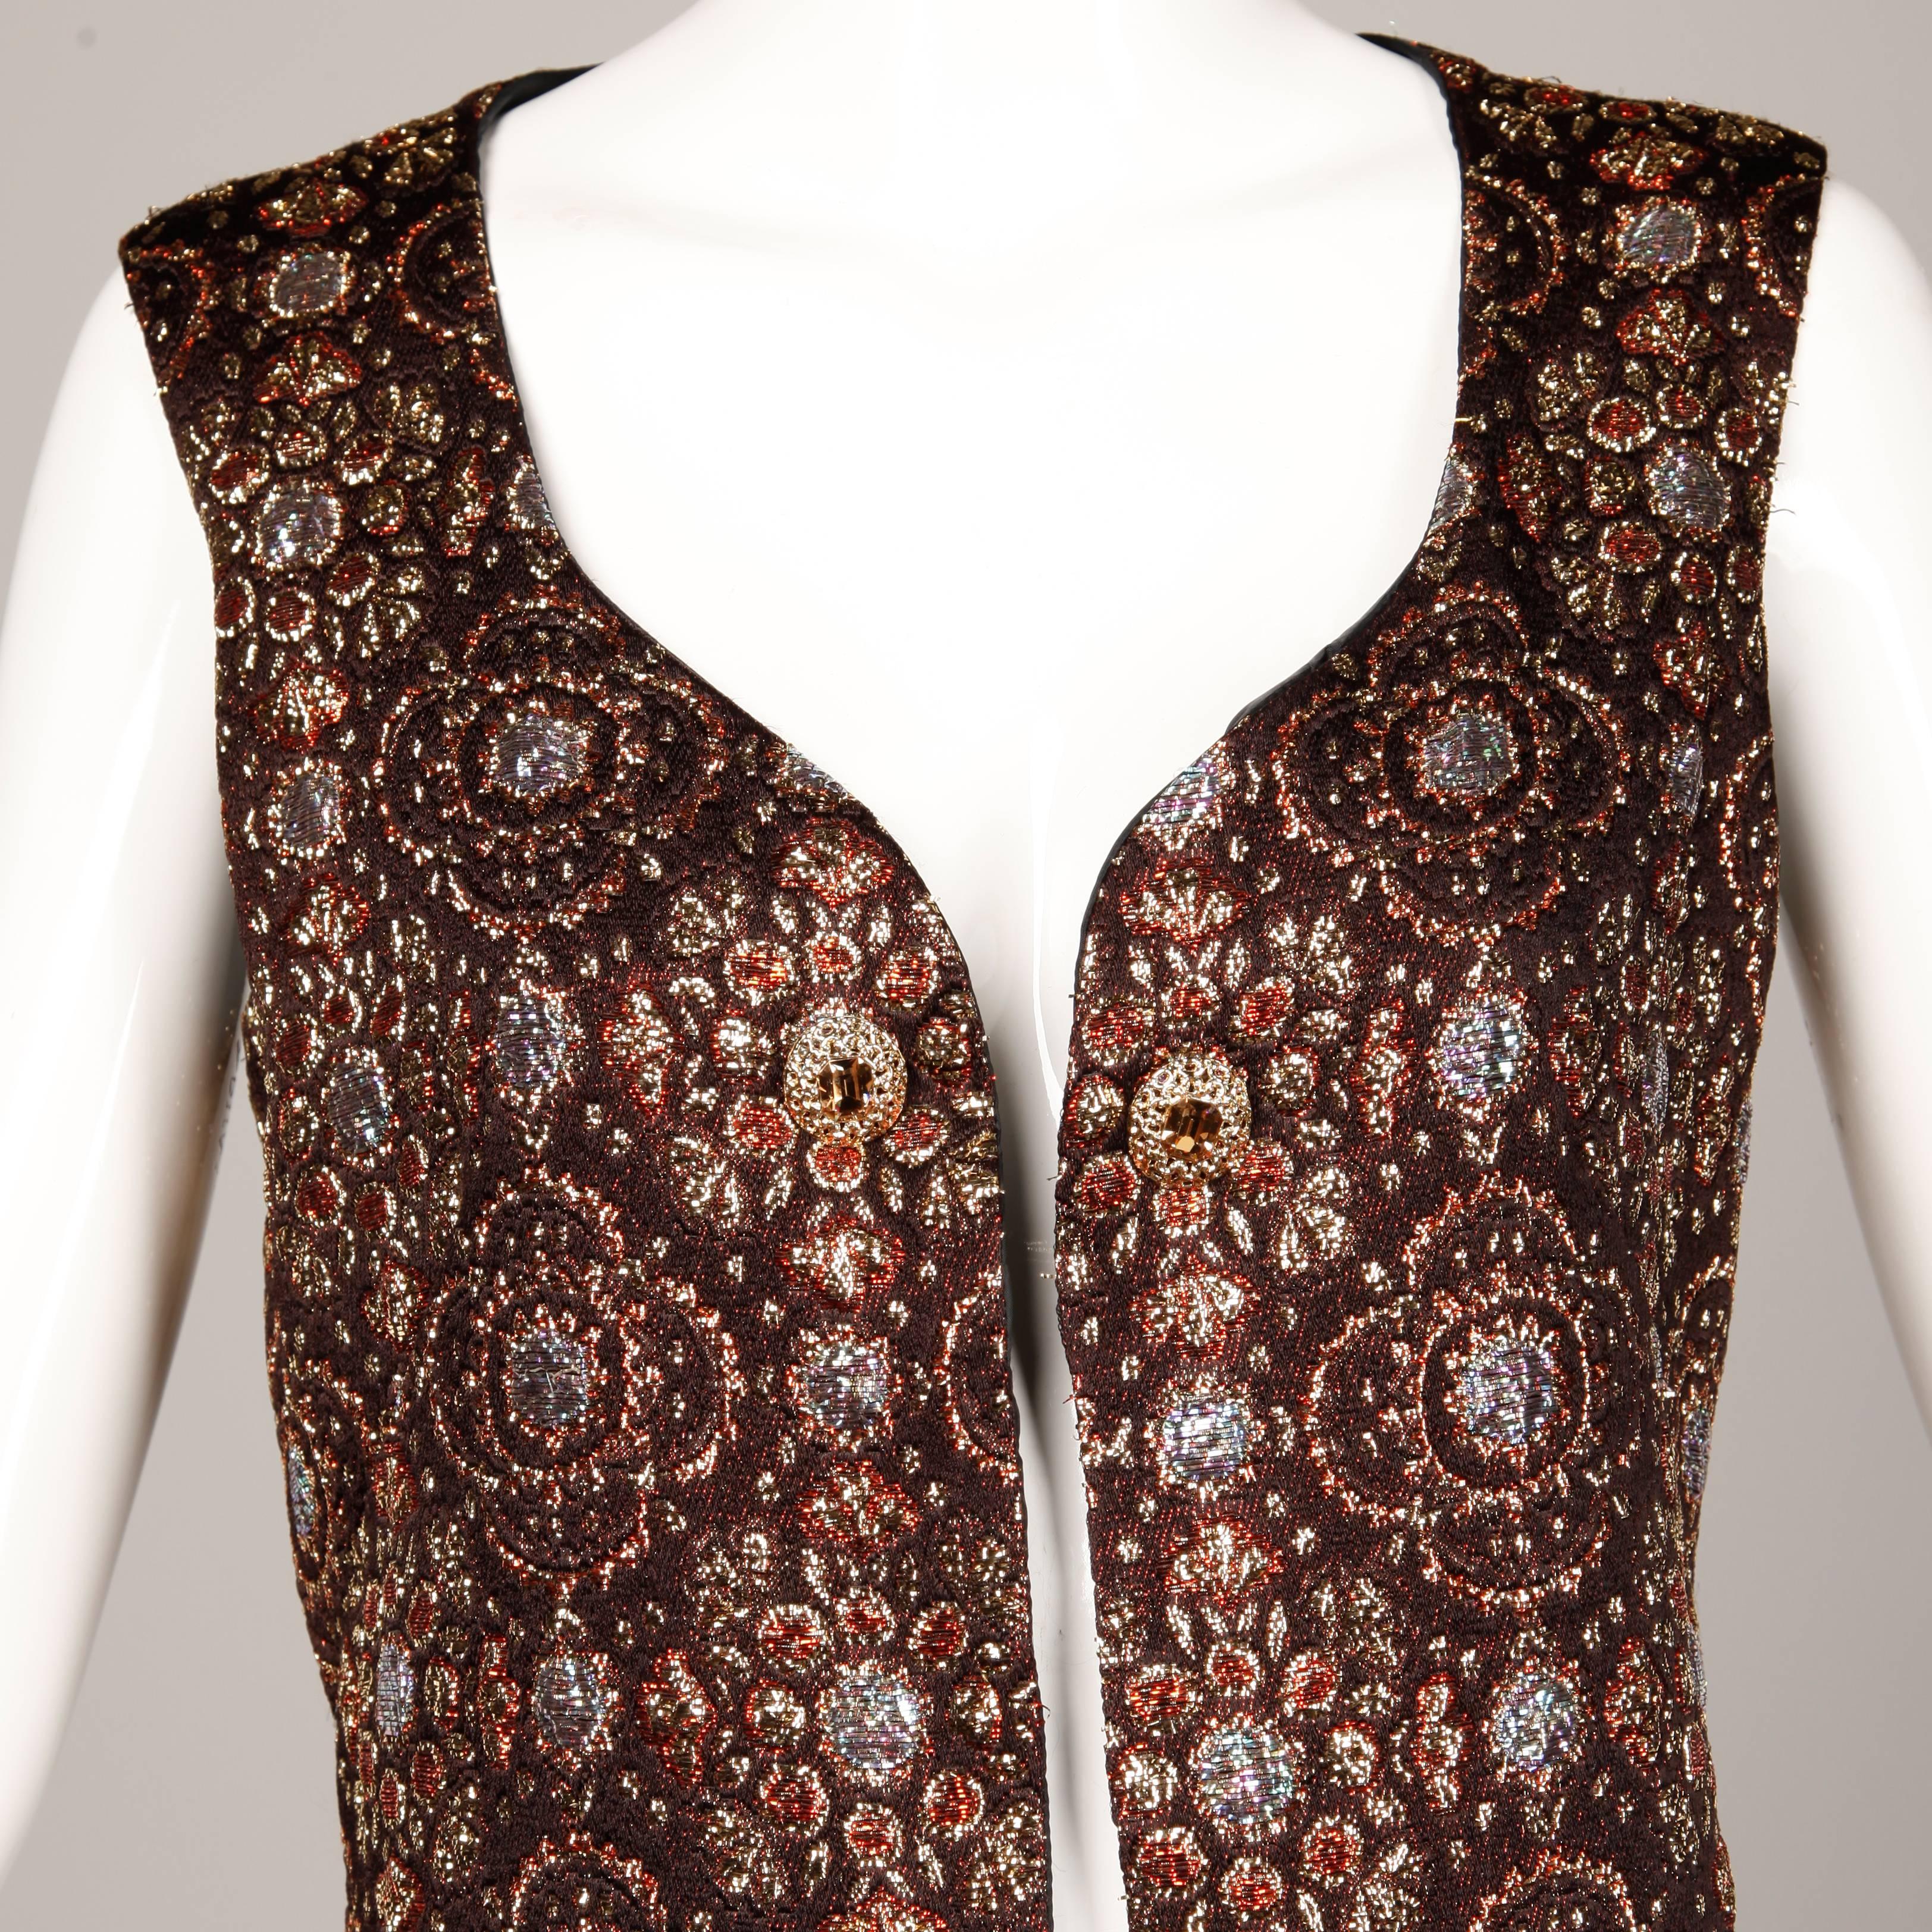 Handmade vintage metallic brocade maxi vest with rhinestone detail near the neckline. Fully lined with no closure (hangs open). There is no marked size but the vest fits up to a modern size large and any size smaller. The bust measures 38" and